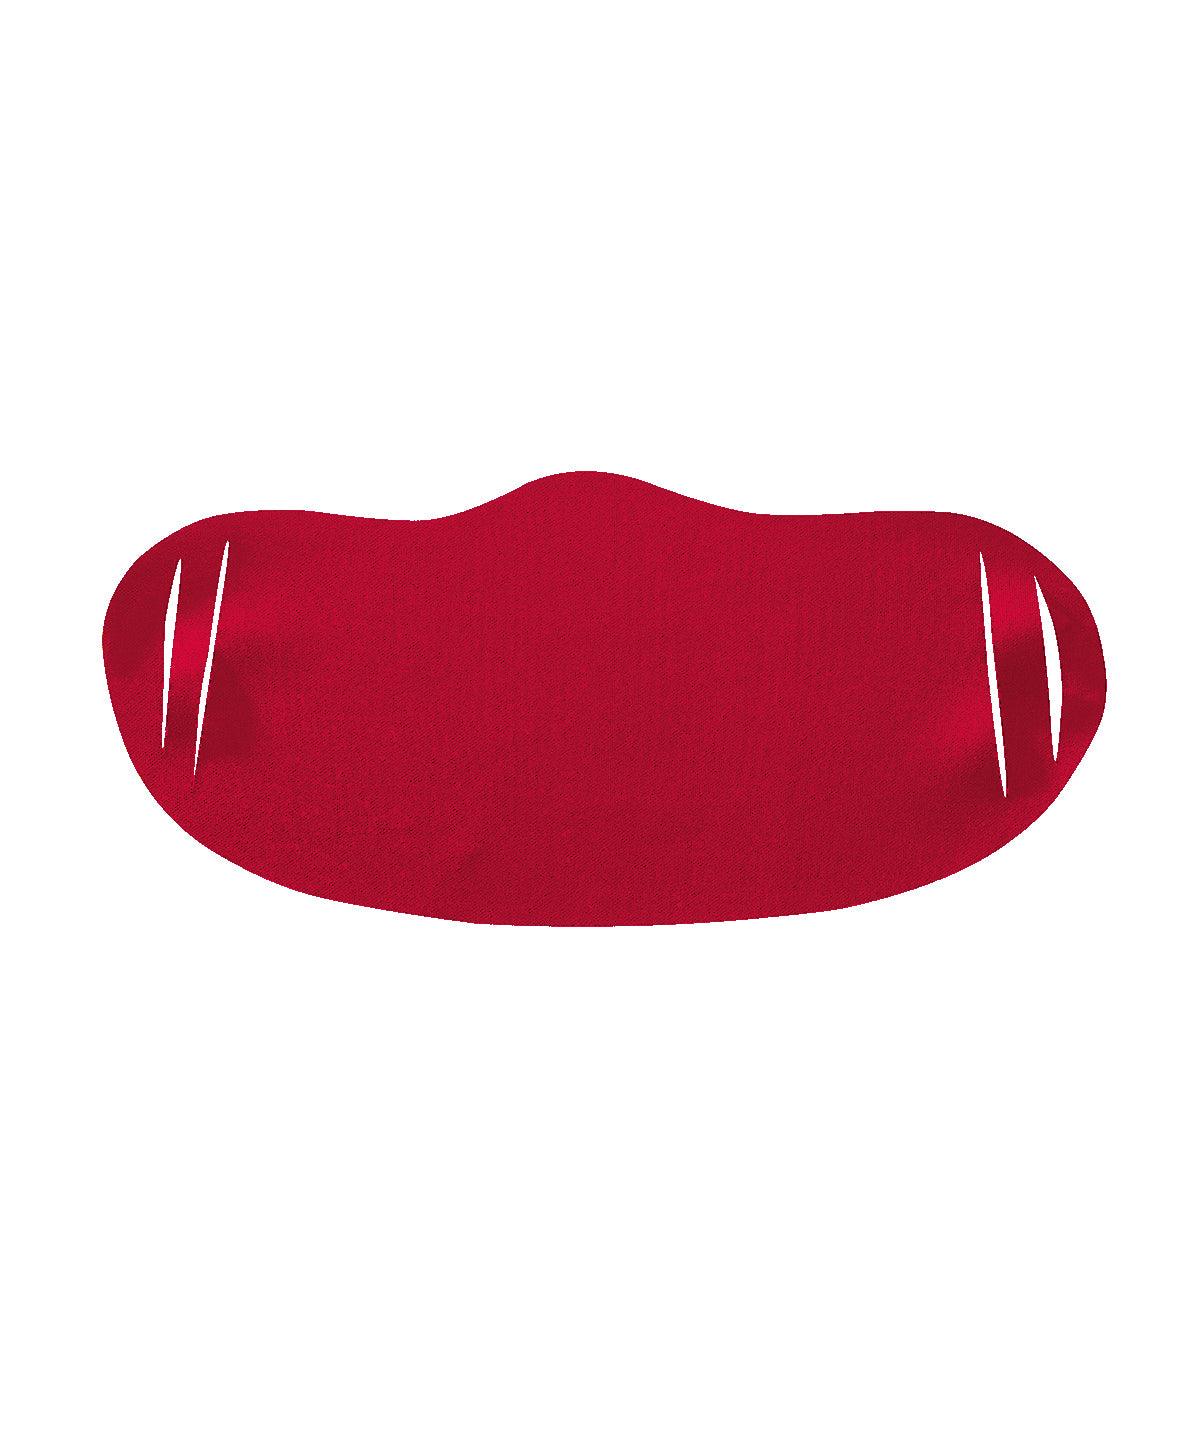 Red - Face cover (Packs of 10 and 50) Face Covers AXQ Face Covers, Gifting, Personal Protection, Selected Protectivewear, Sublimation Schoolwear Centres